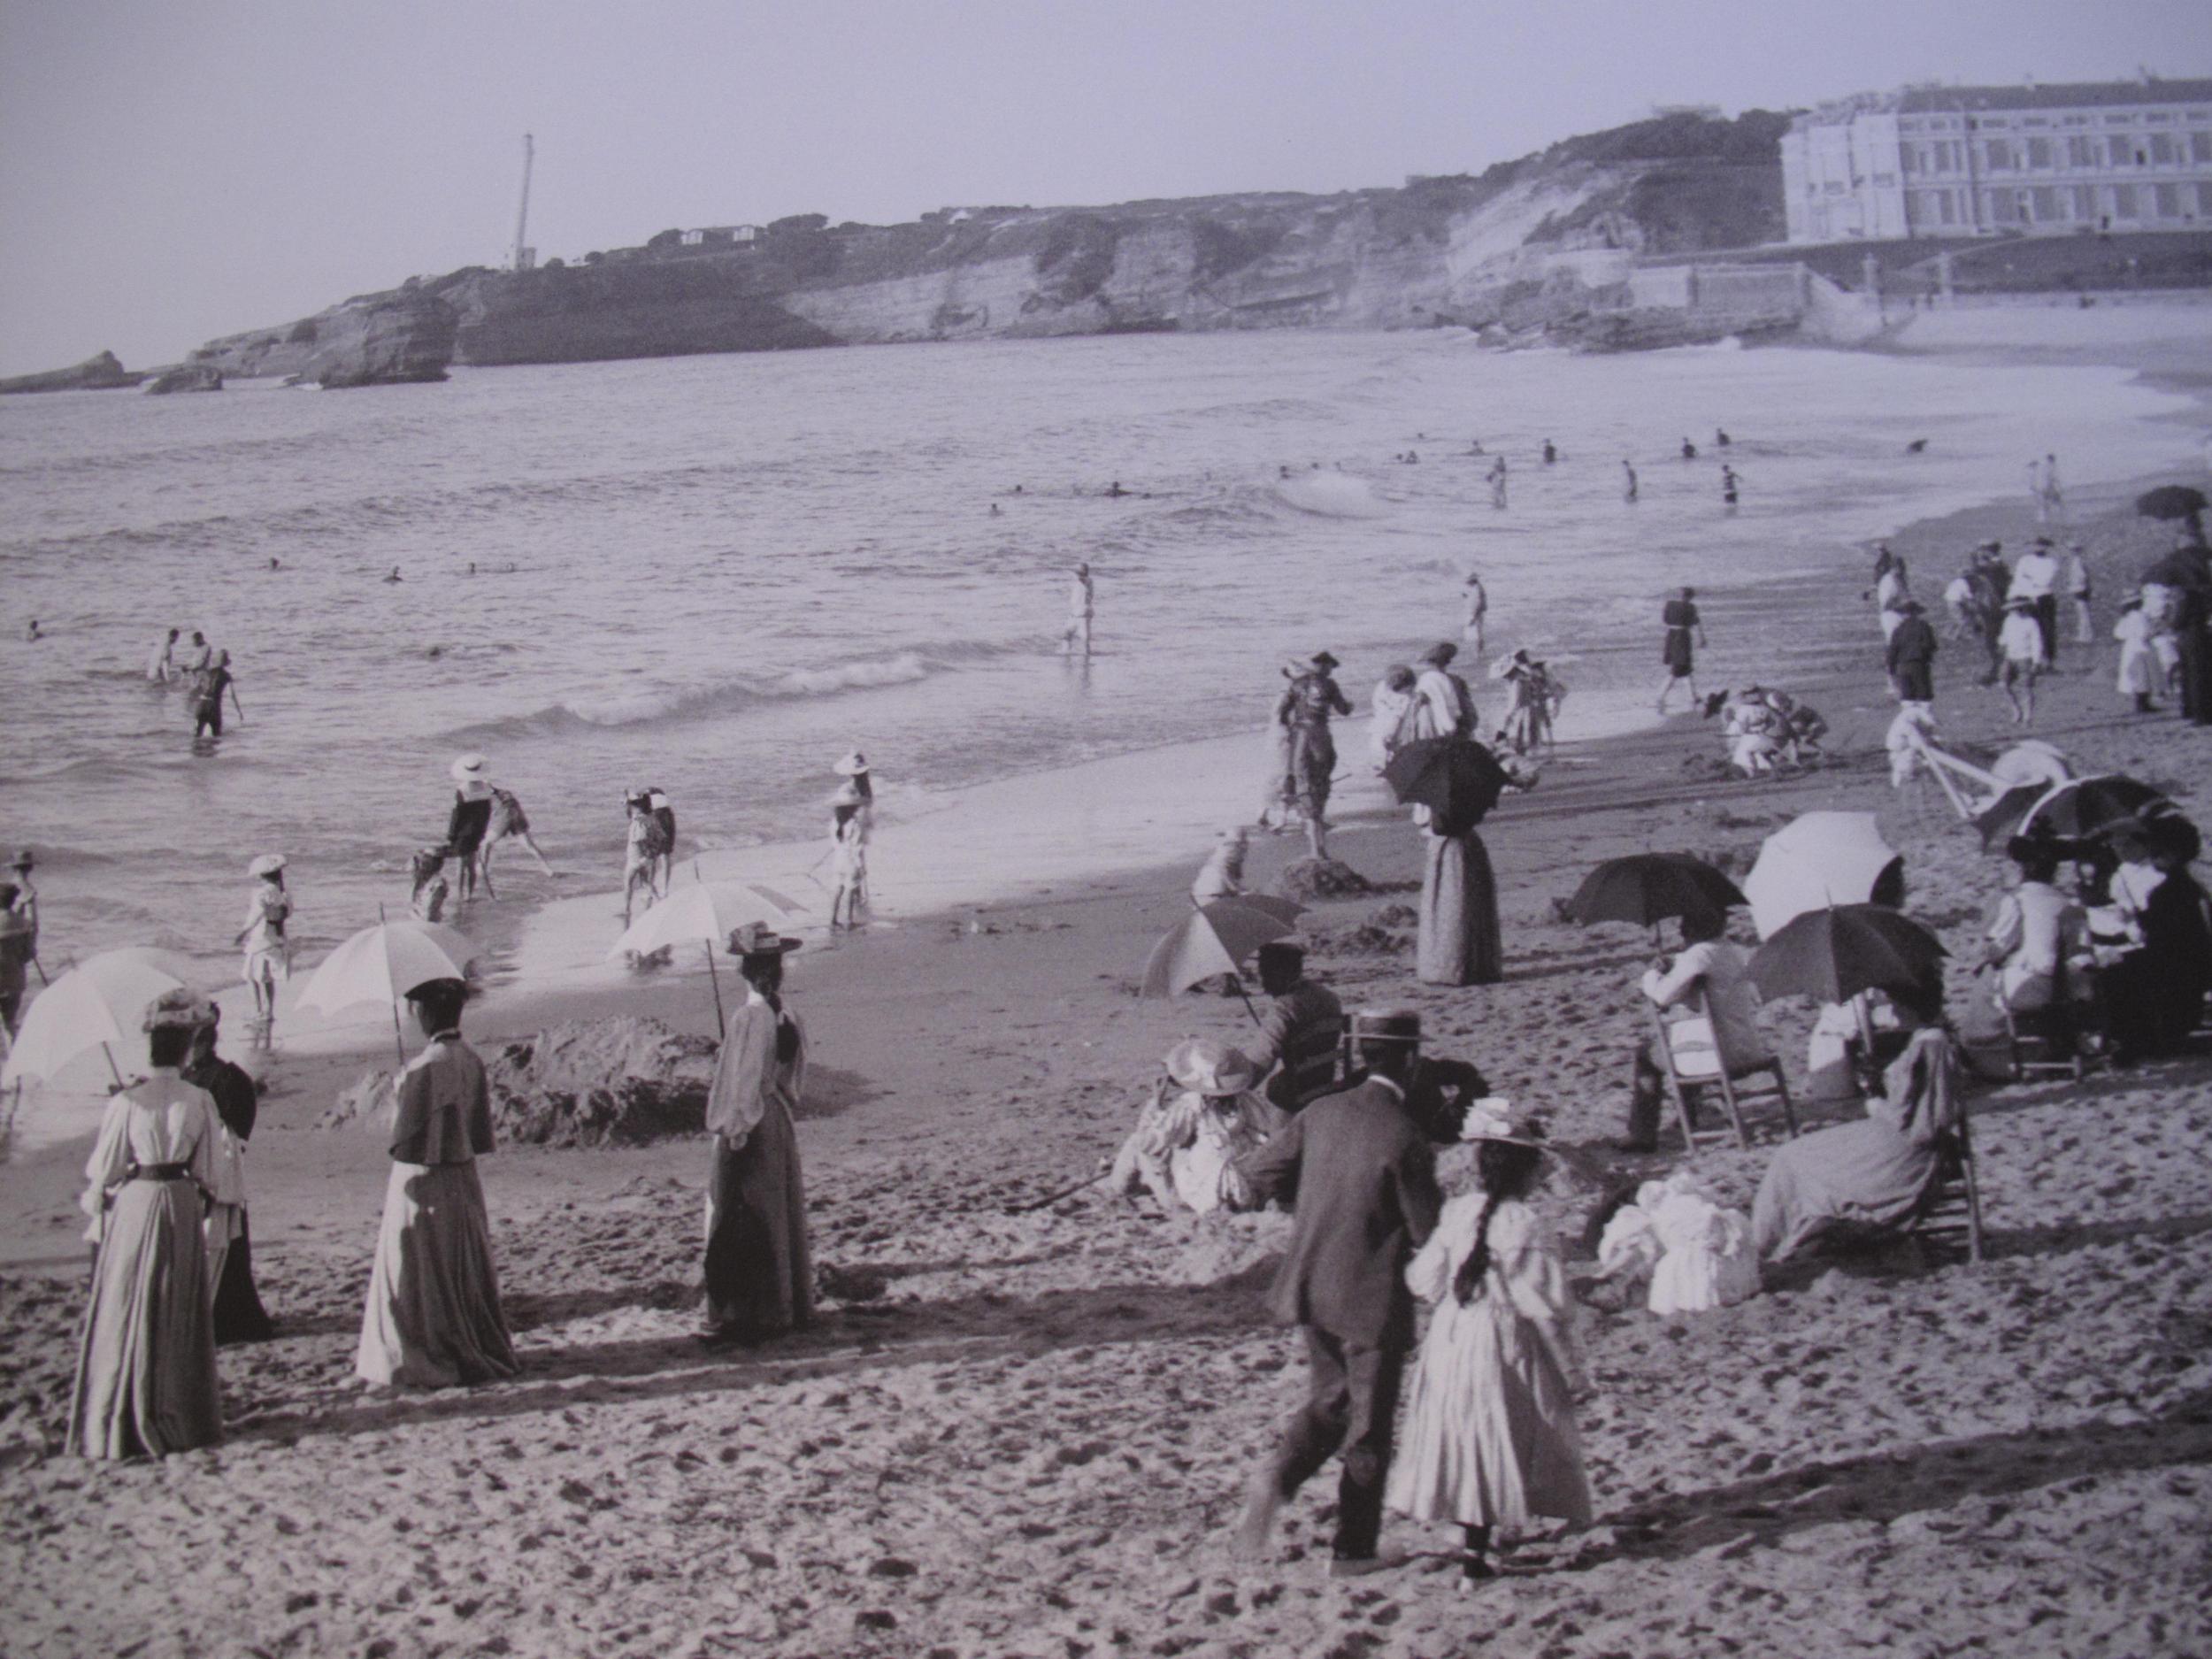 Biarritz was a popular holiday spot for Europe's high society